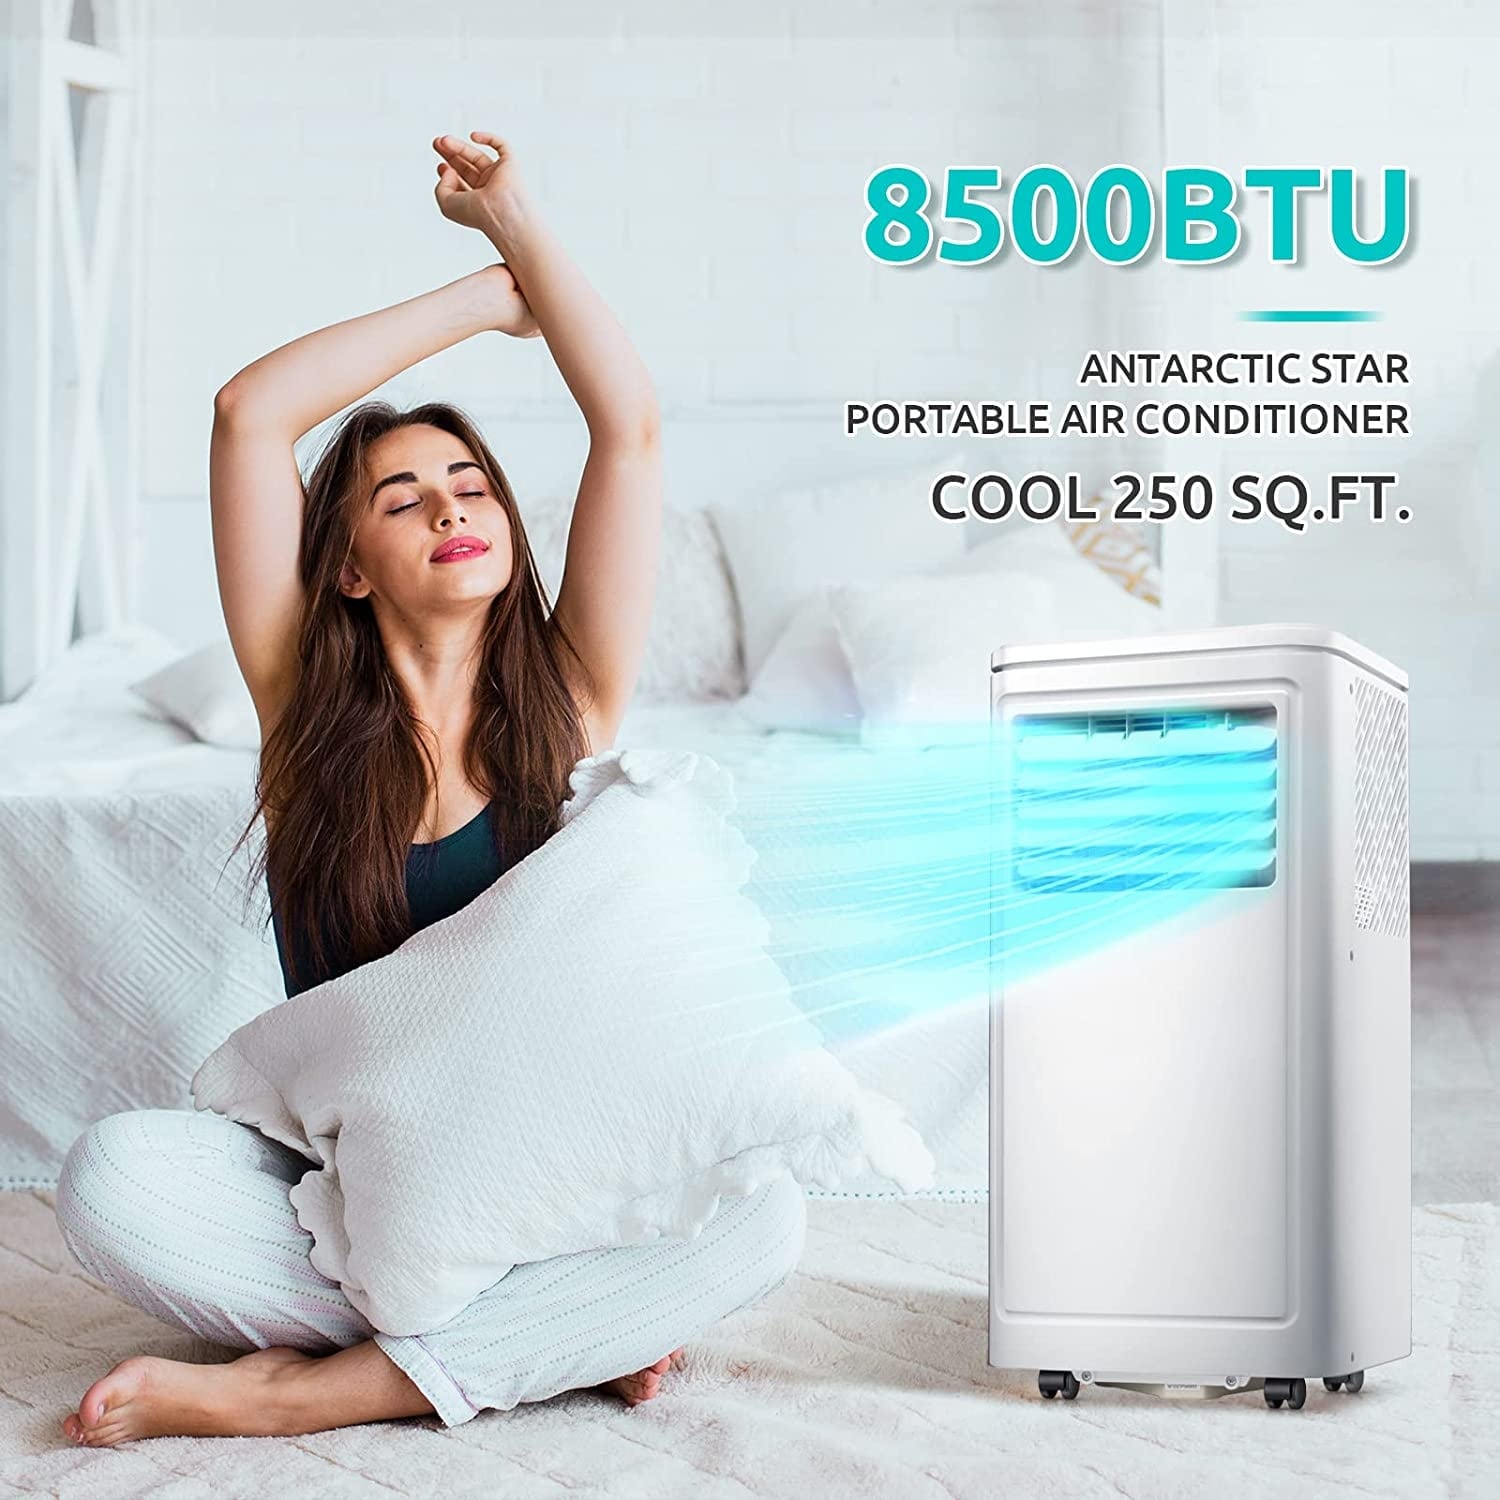 https://ak1.ostkcdn.com/images/products/is/images/direct/db07b06d2b5623af51a2ae98d3b5d2b88a156694/Portable-Air-Conditioner-8500-BTU%2C-Remote-Control%2C-Cools-250sq.-ft%2C-Quiet-Operation%2CWindow-Fan%2C24H-Timer%2C-2-Fan-Speed.jpg